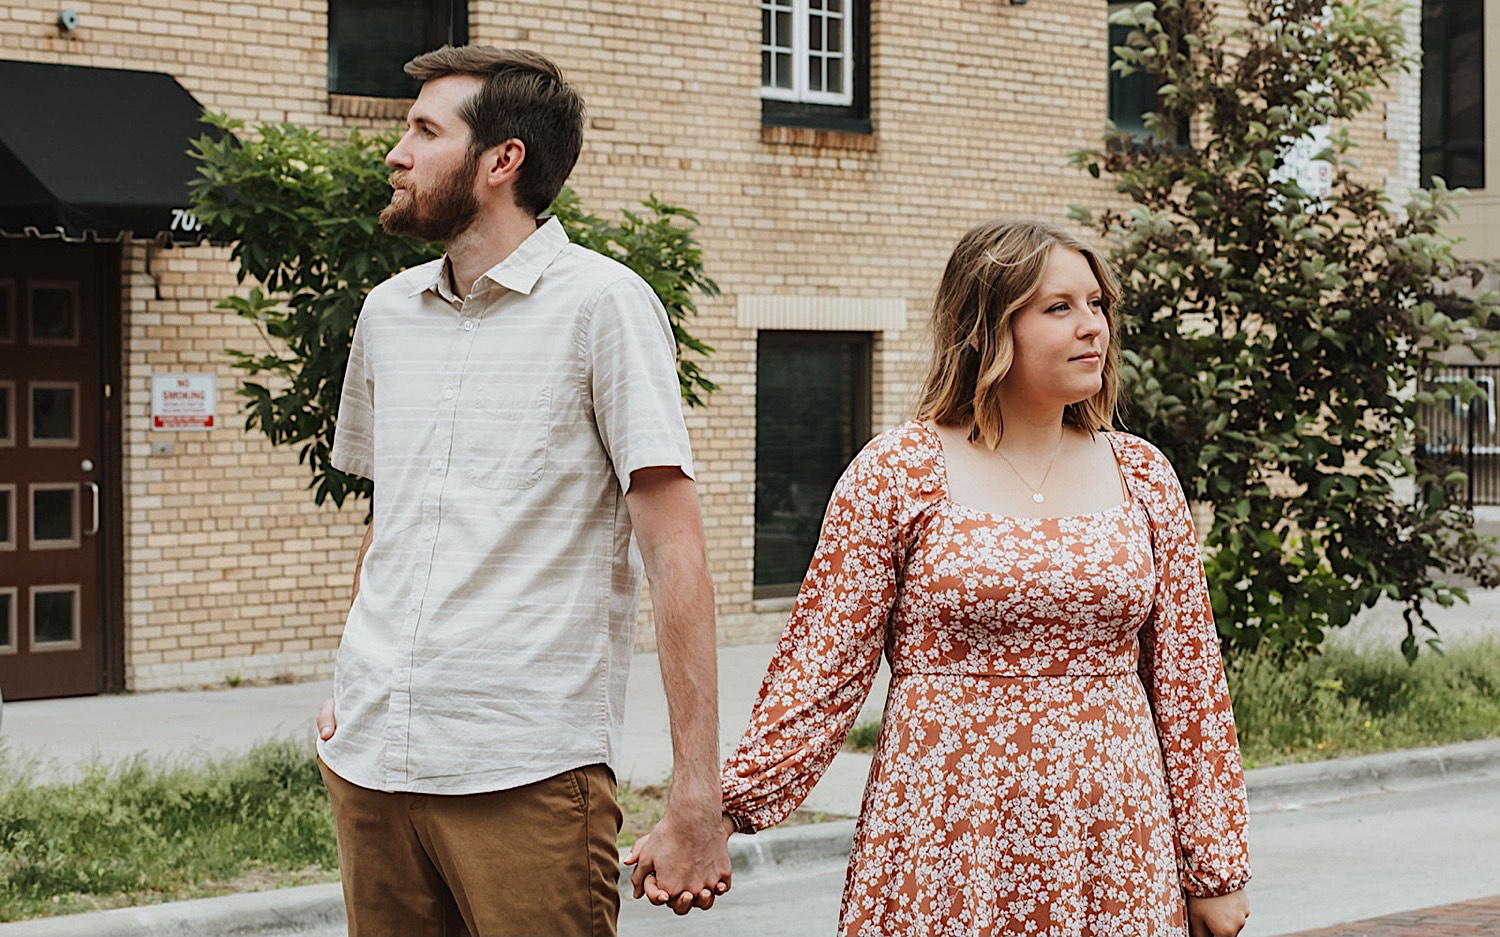 While taking engagement photos in downtown Minneapolis, a couple hold hands while facing and looking away from one another in front of a brick building